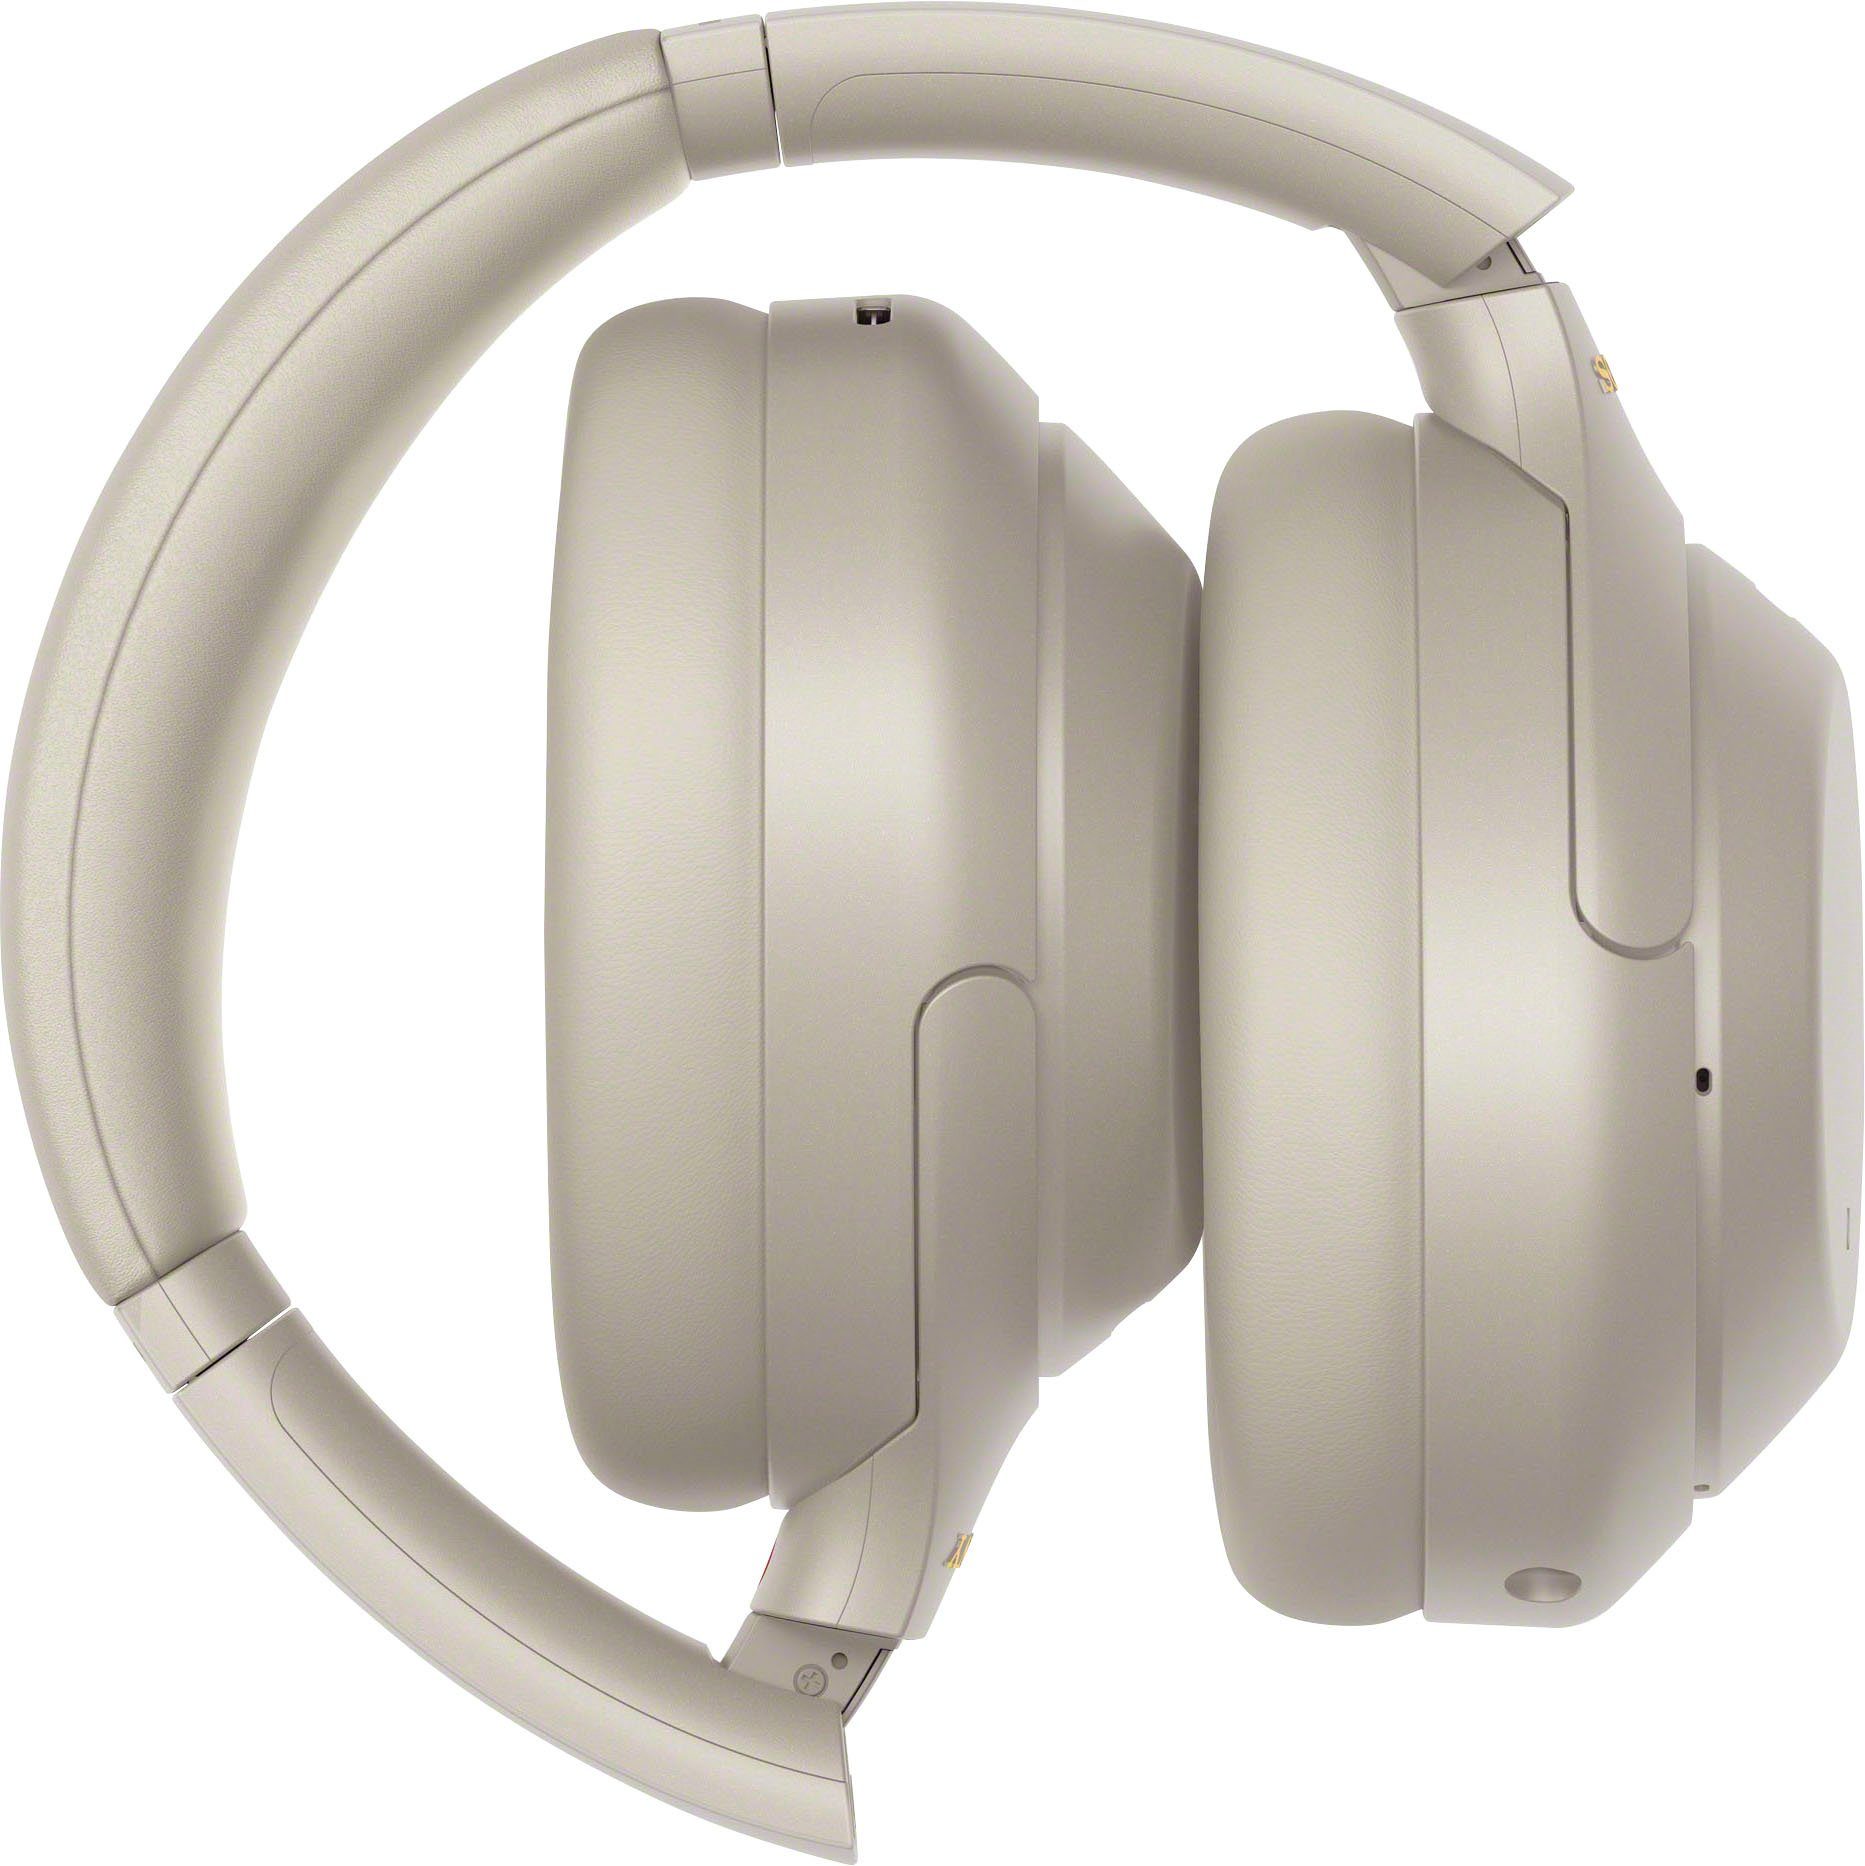 One-Touch Verbindung NFC, Schnellladefunktion) kabelloser (Noise-Cancelling, Sony Bluetooth, Sensor, Silber Over-Ear-Kopfhörer Touch NFC, WH-1000XM4 via